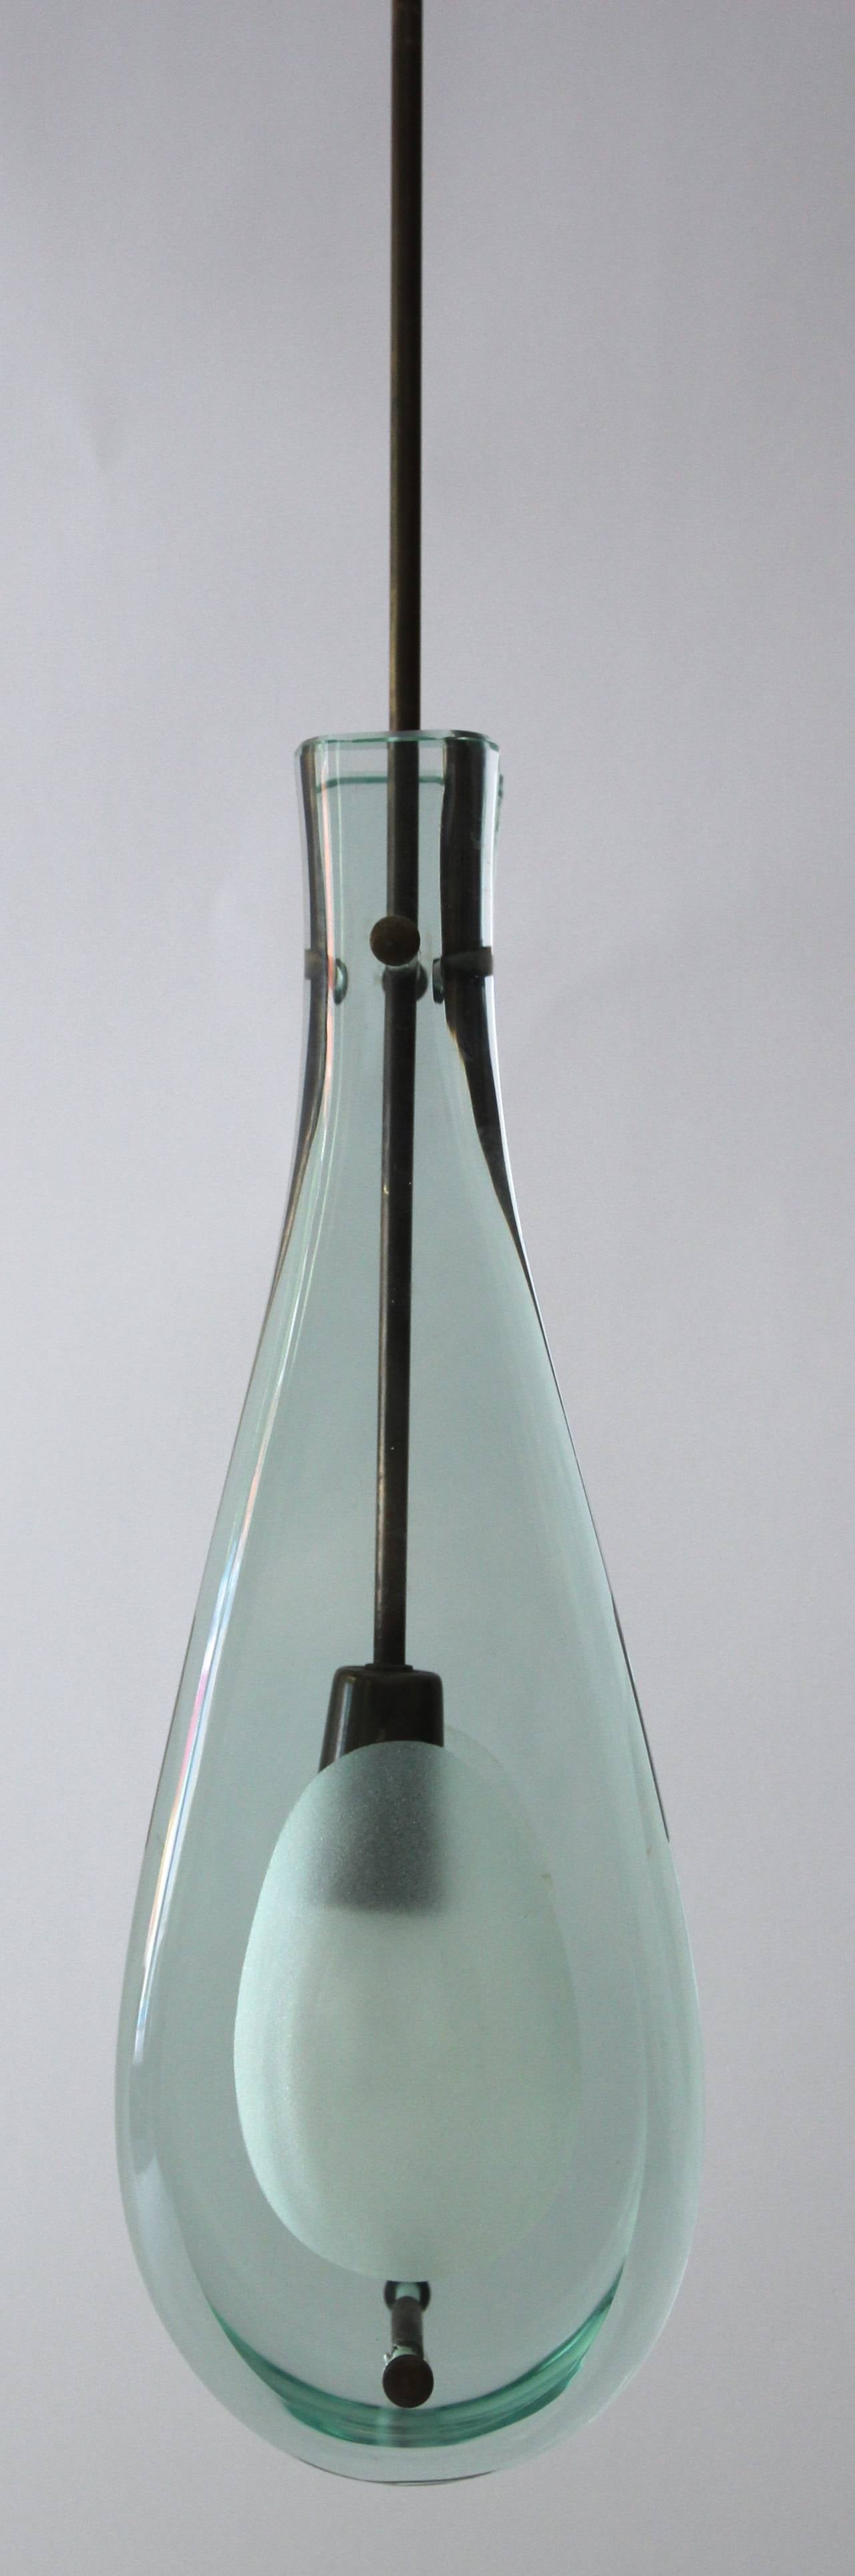 Max Ingrand, 2258 hanging lamp, manufactured by Fontana Arte,
ground shaped crystals with opaque hollows and brass fittings,
Italy, circa 1963.
Measures: Height: 93 cm (36.6in), width: 15 cm, depth: 9 cm.

Biography: similar model, Quaderno di